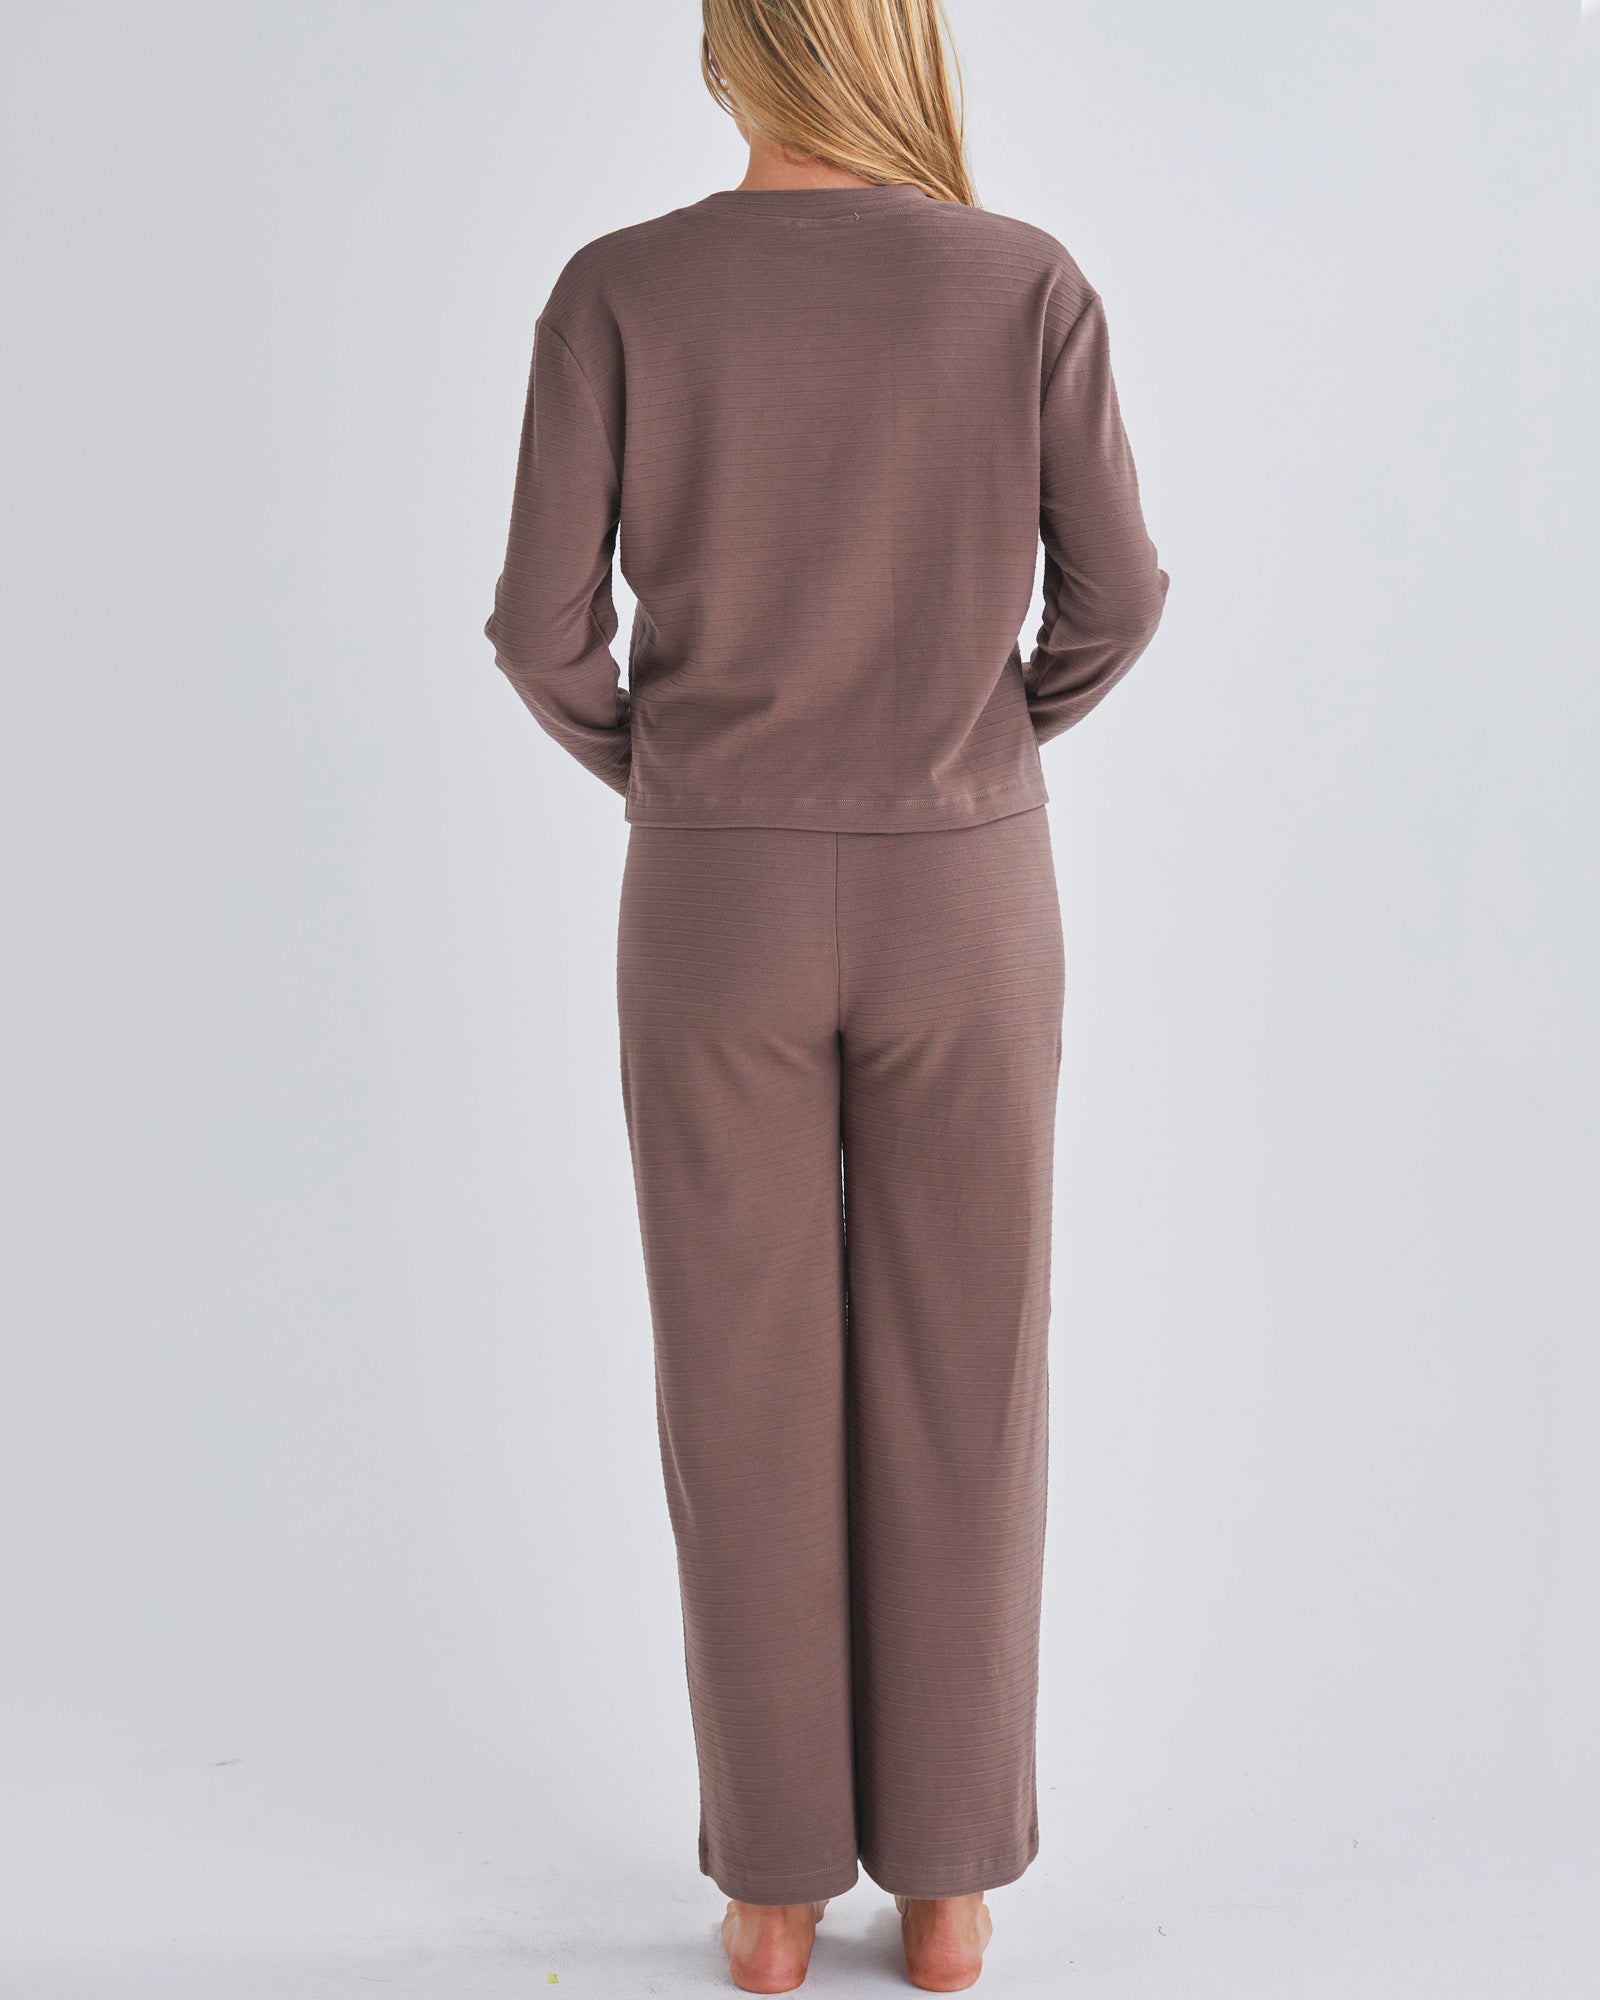 Back View - A pregnant Woman Wearing 2-piece Maternity Winter Lounge Set in Mocha from Angel Maternity